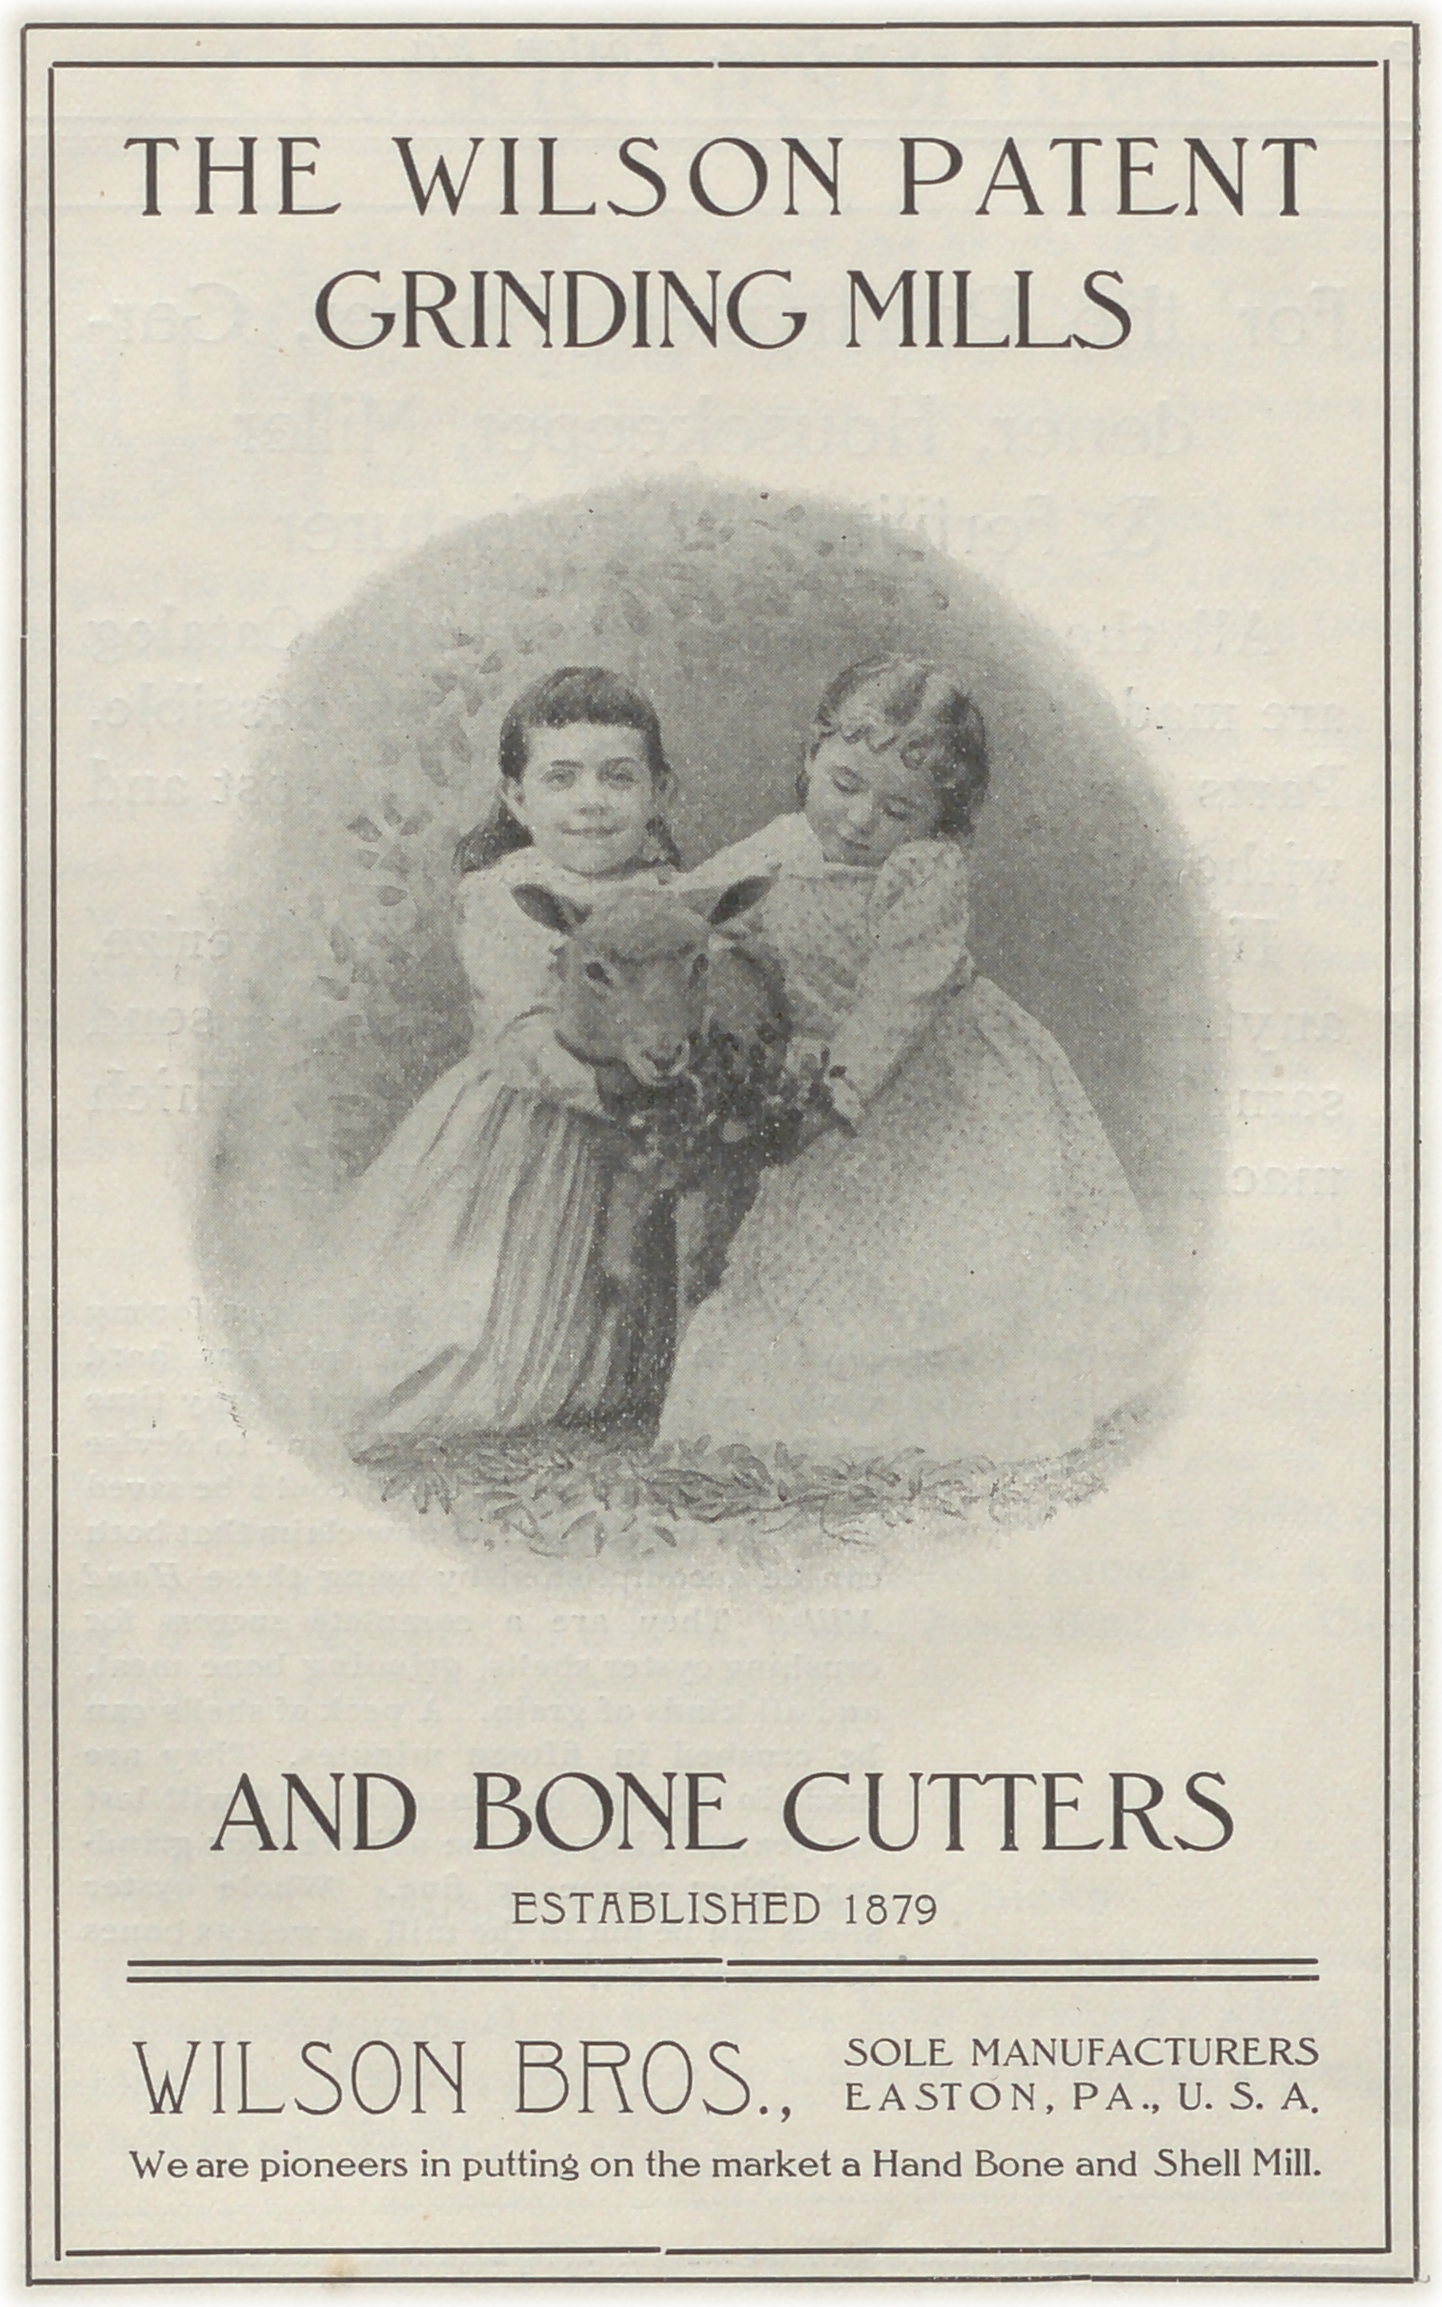 Title page of a catalog for meat processing equipment, with photo of children hugging a lamb.